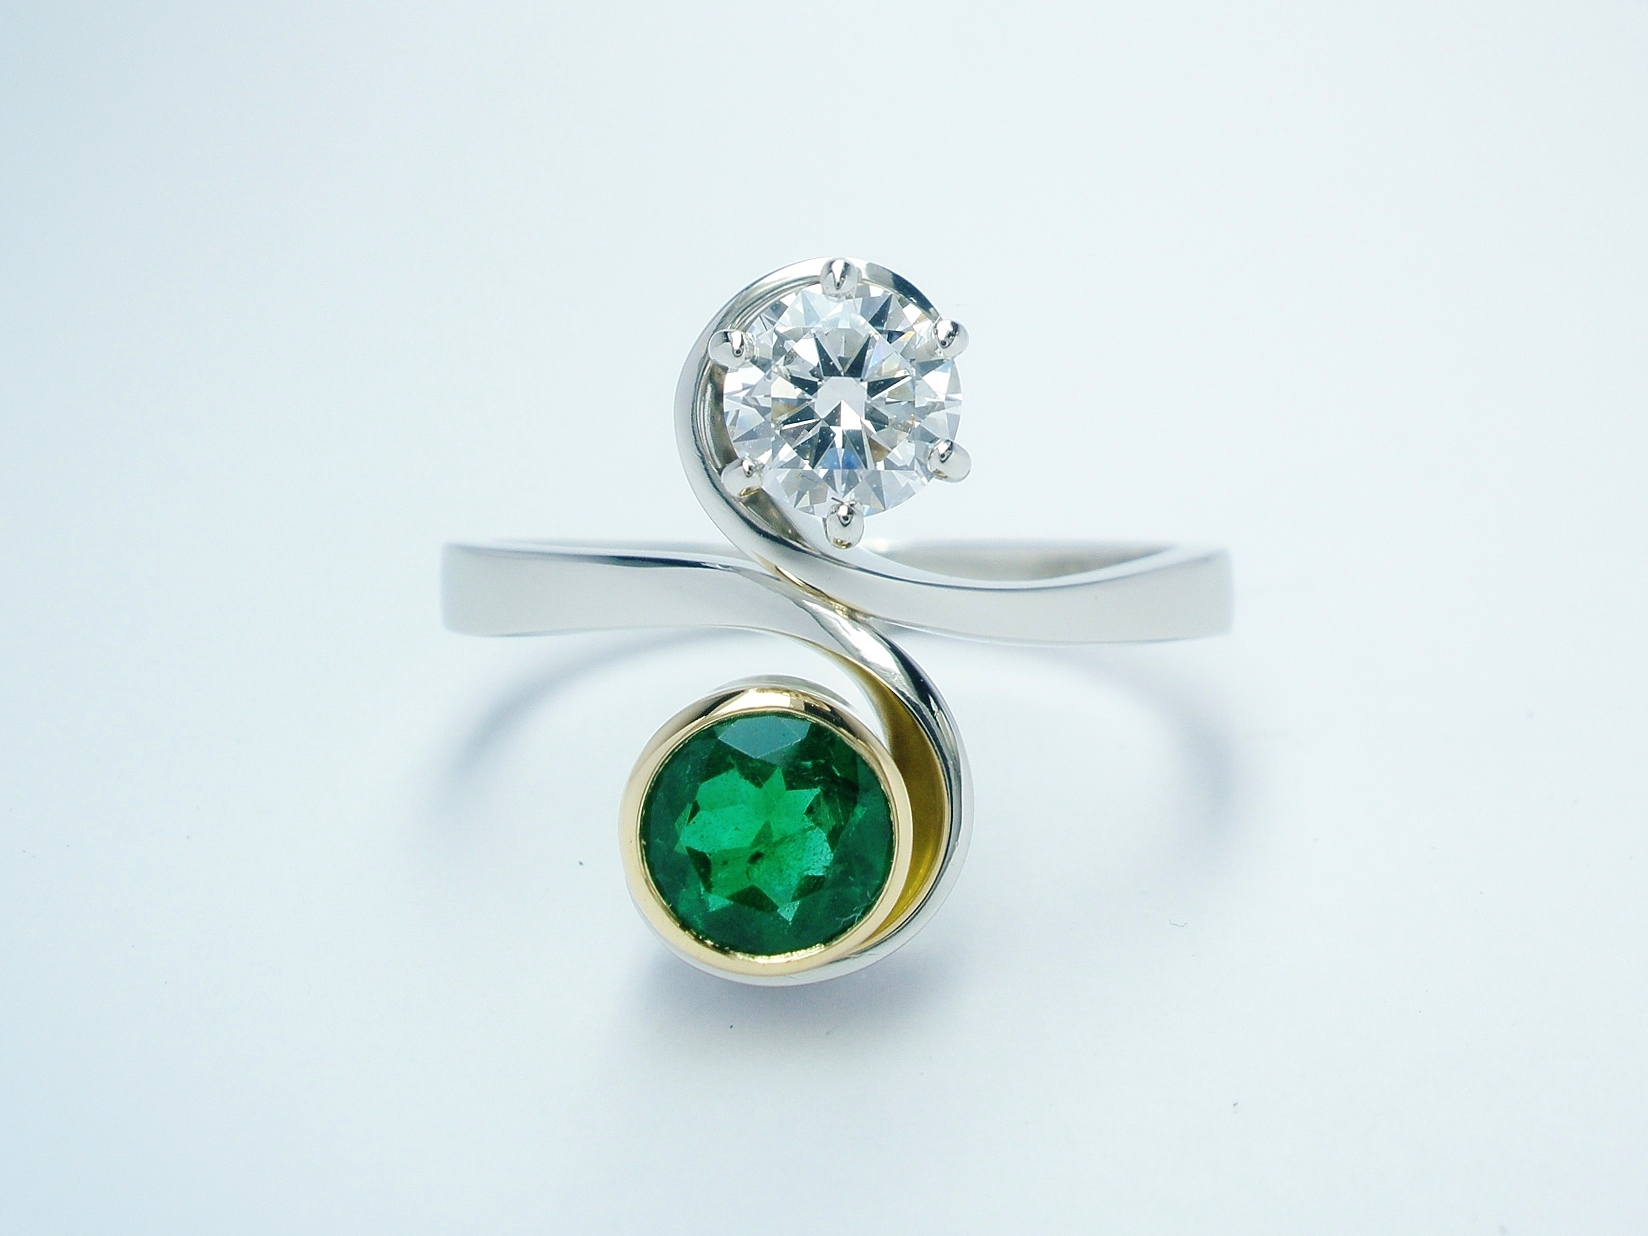 0.50ct 'D' Internally Flawless Diamond and round emerald 2 stone ring in the form of an initial 'S' mounted in platinum & 18ct yellow gold.